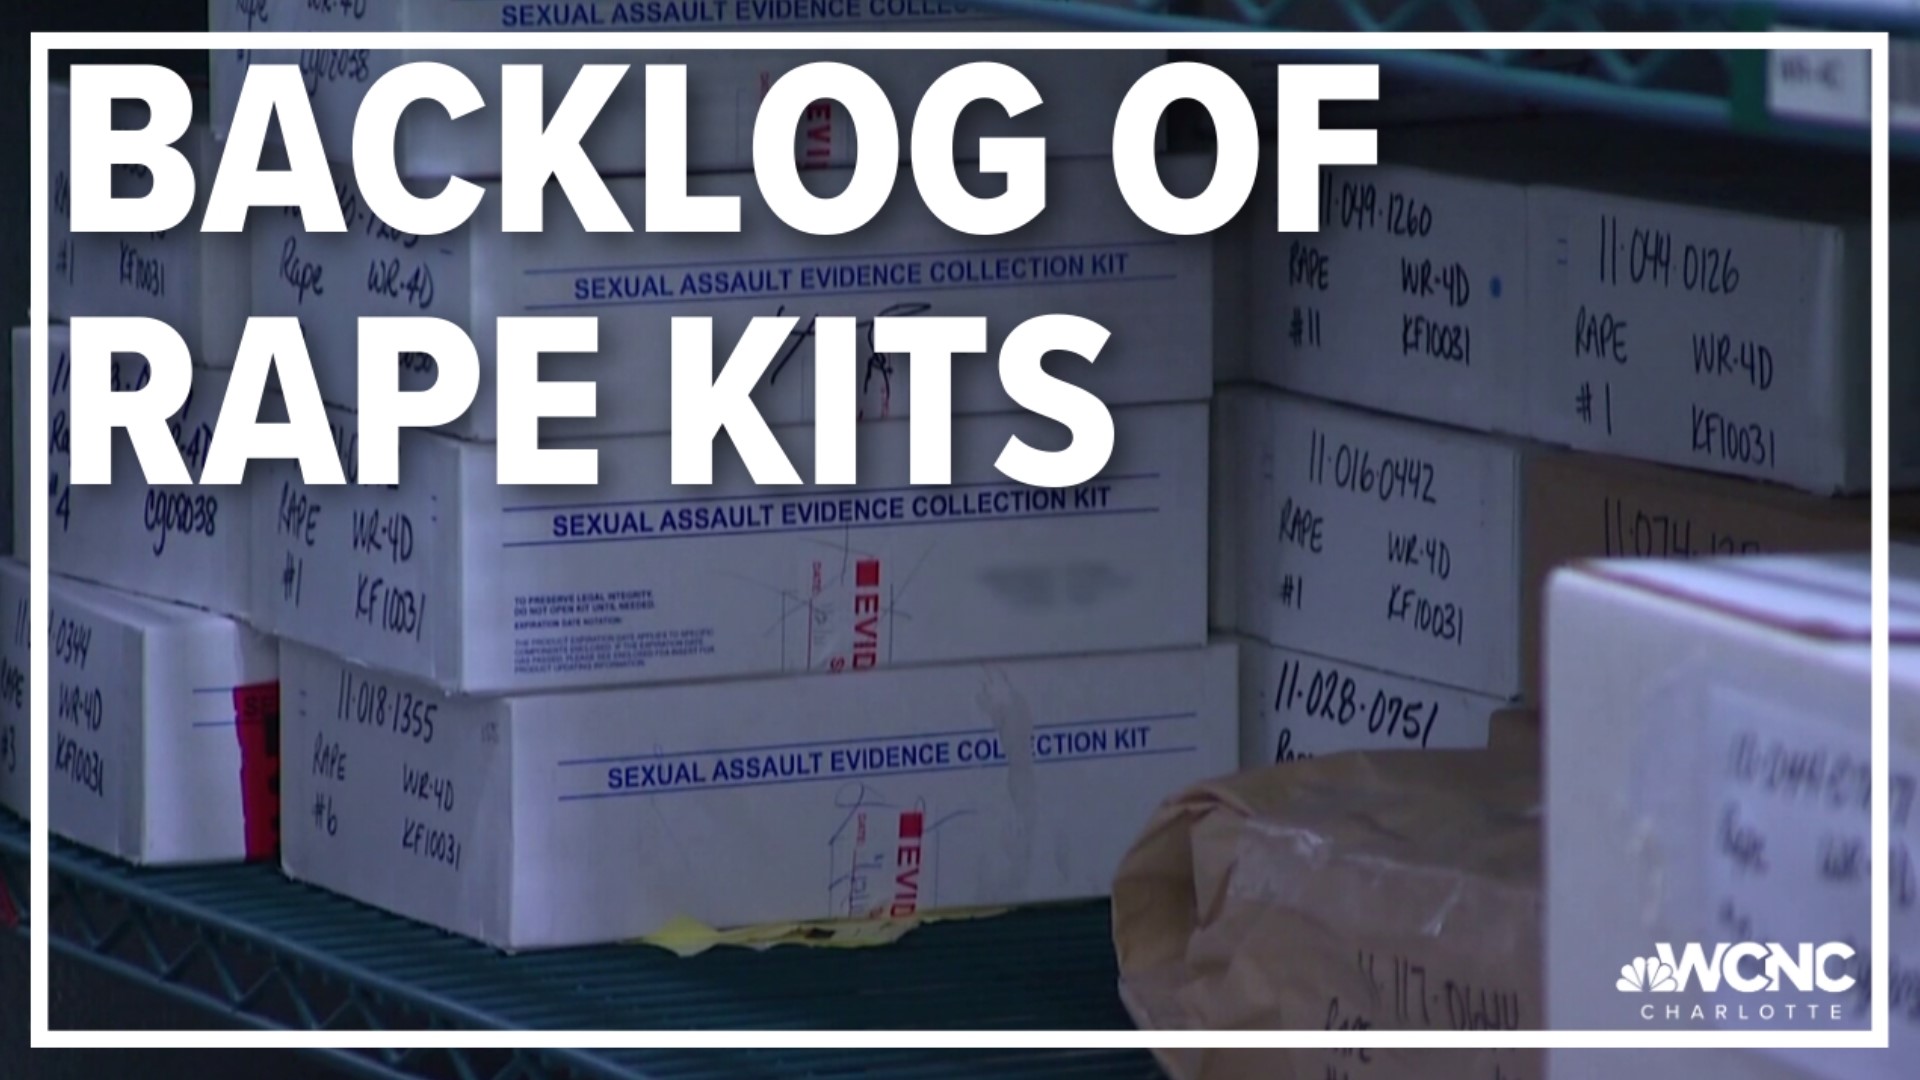 The statewide DNA testing system was created to improve the backlog in rape kits at local police departments but the crime labs are still behind.